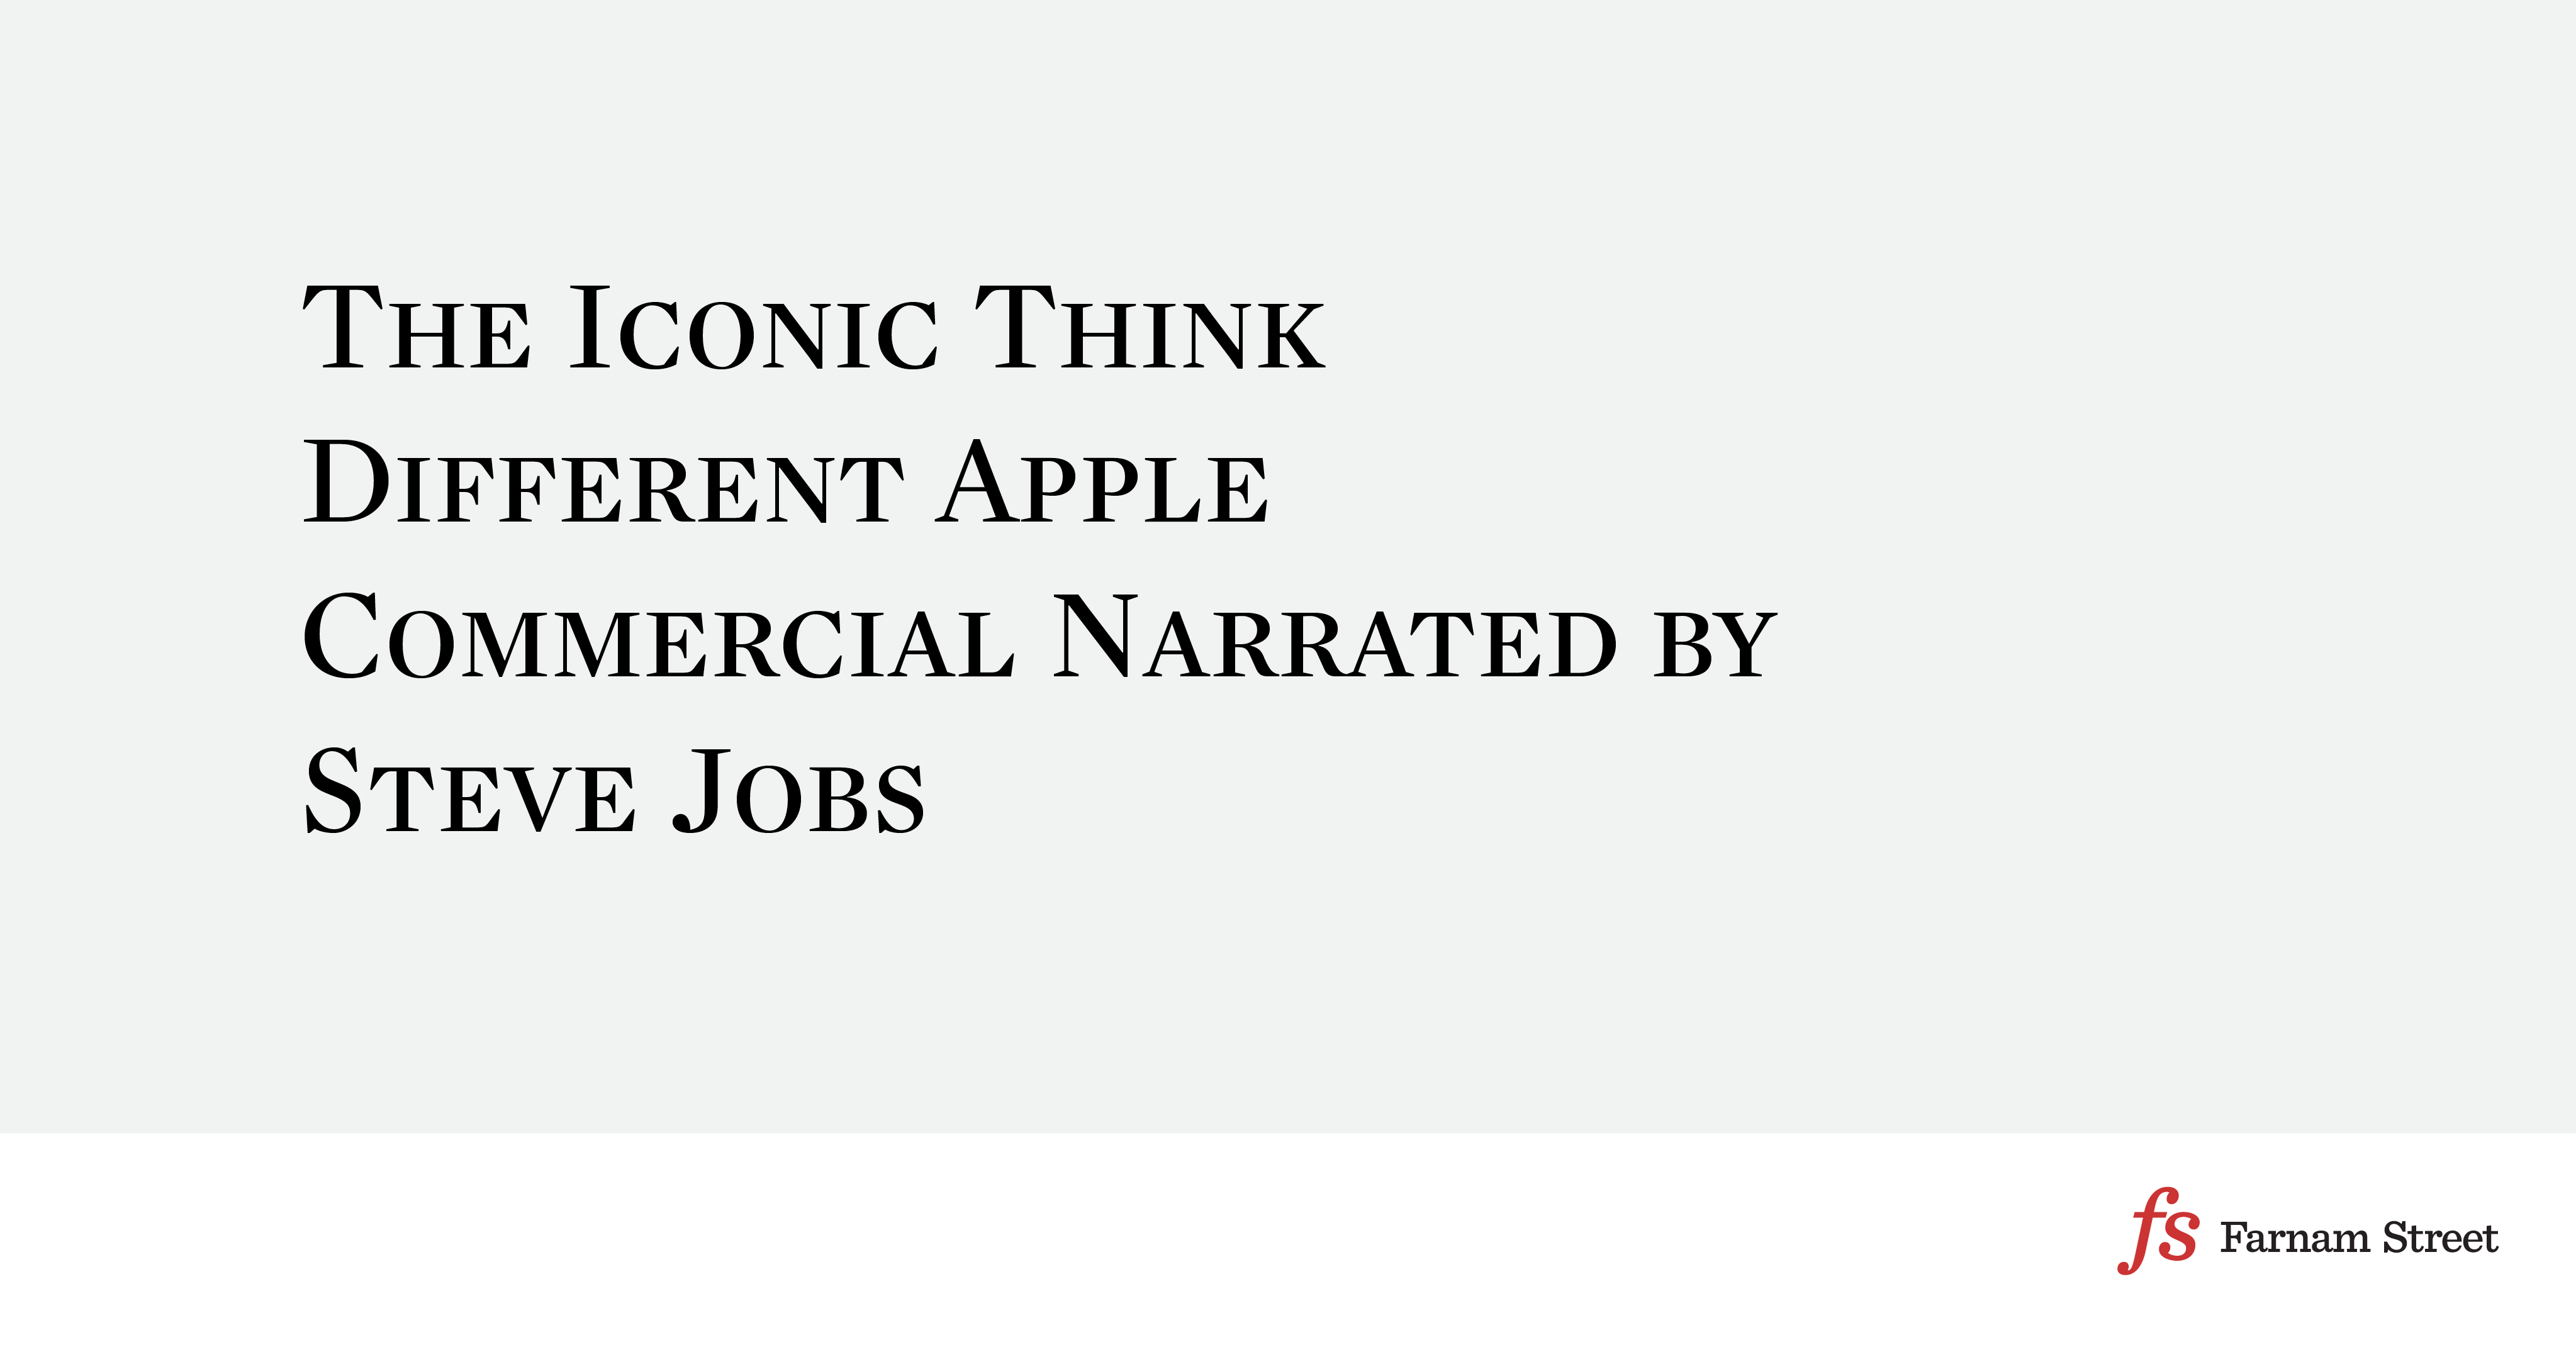 Think Different Apple Commercial